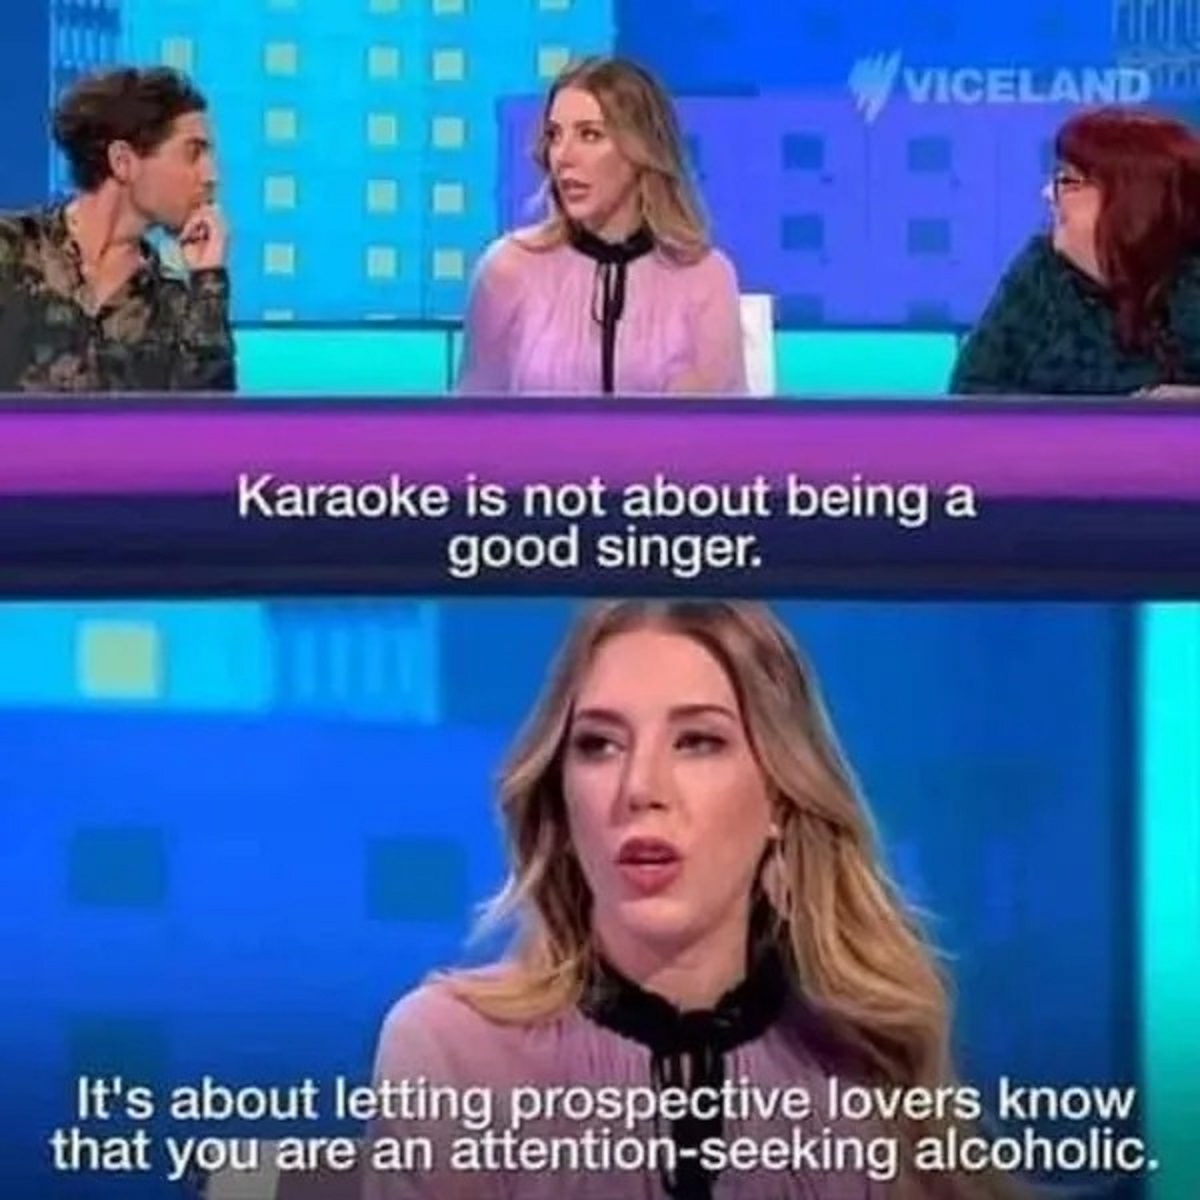 karaoke is not about being a good singer - Viceland Karaoke is not about being a good singer. It's about letting prospective lovers know that you are an attentionseeking alcoholic.